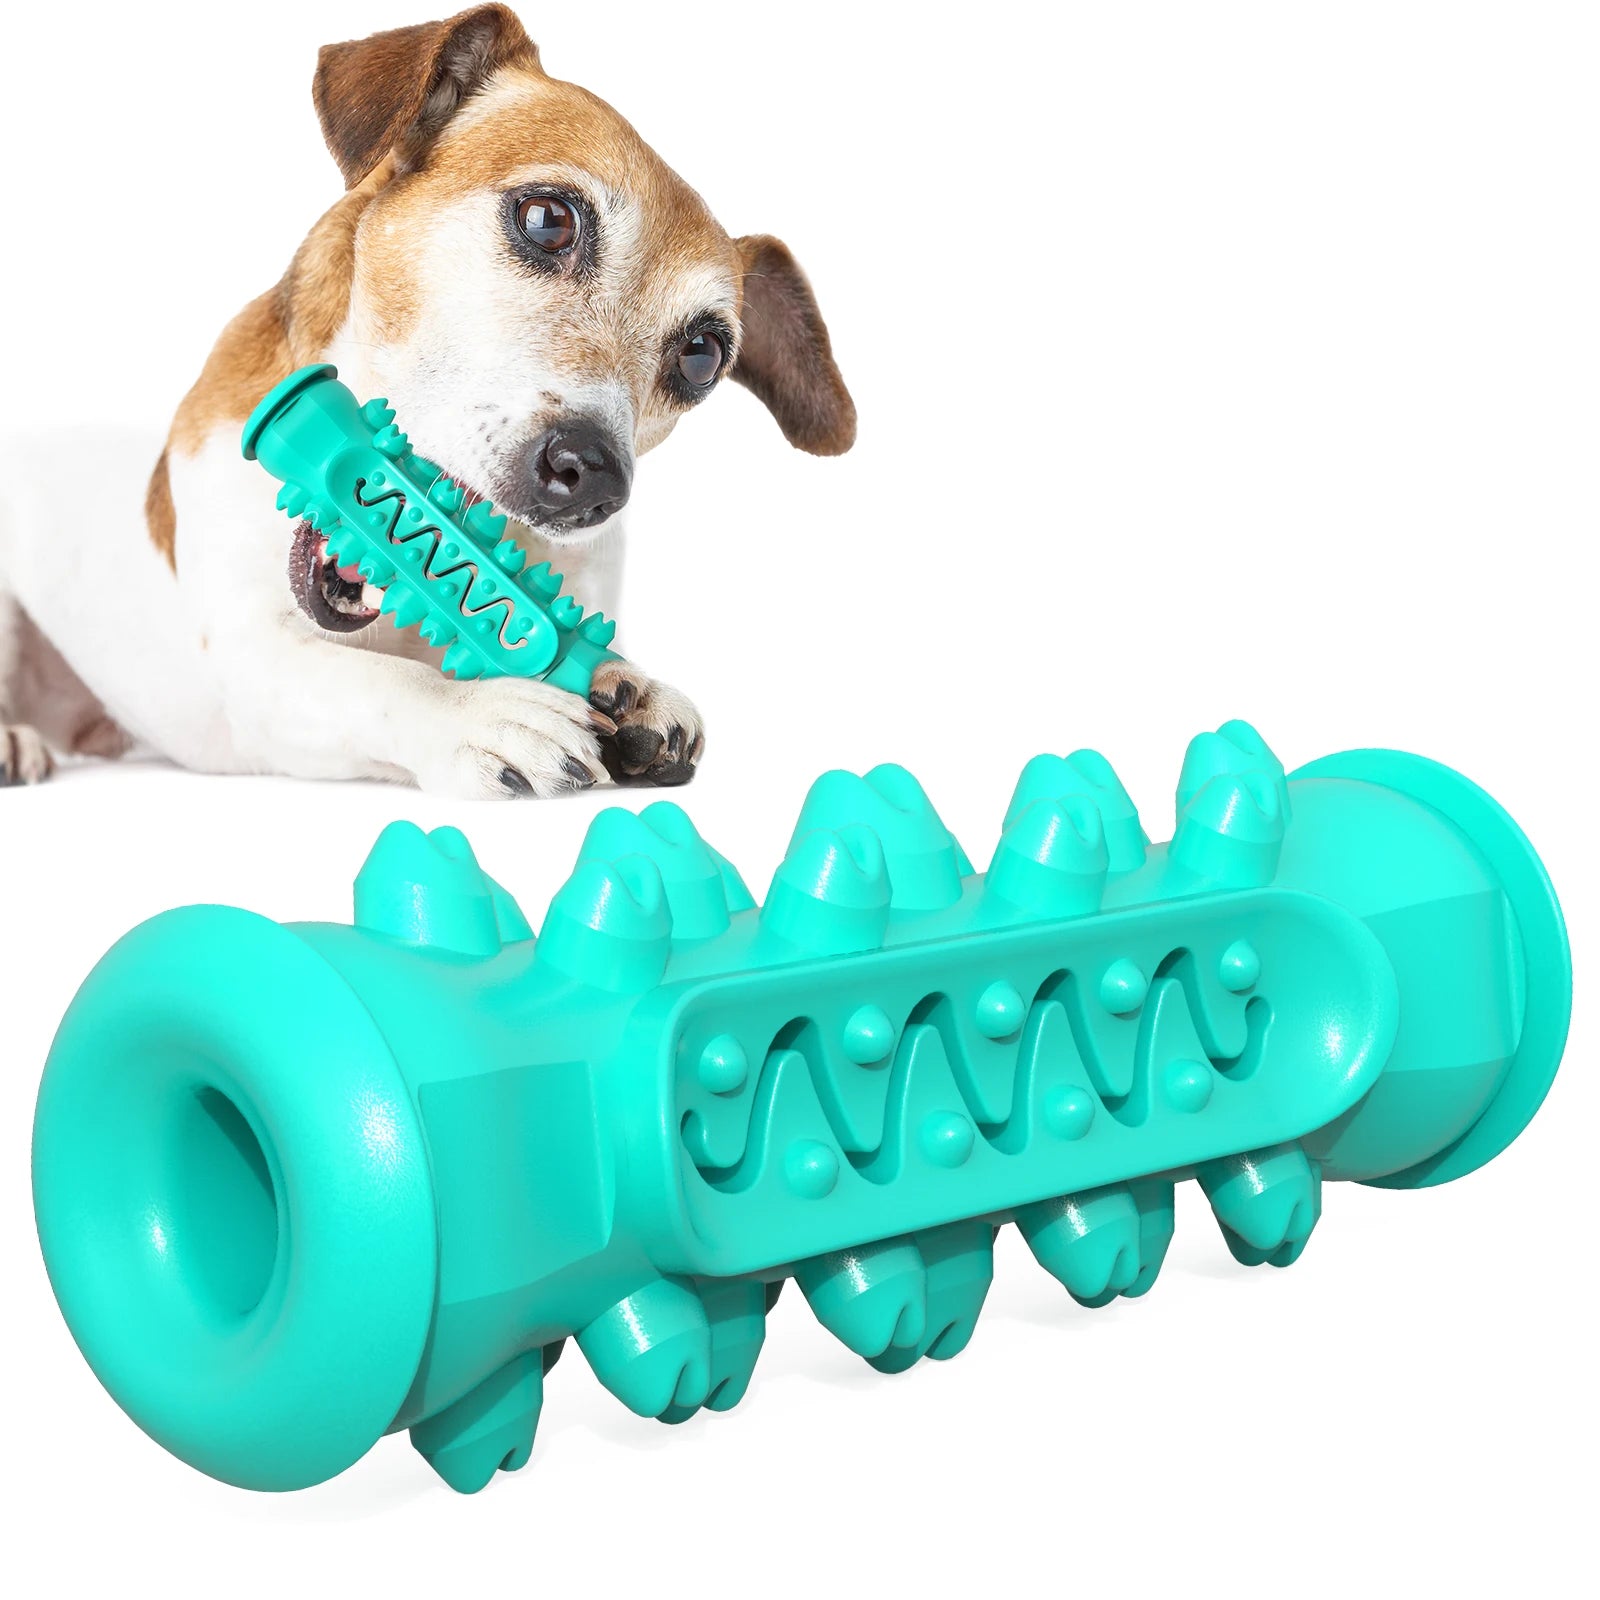 Dogs Chewing Toy